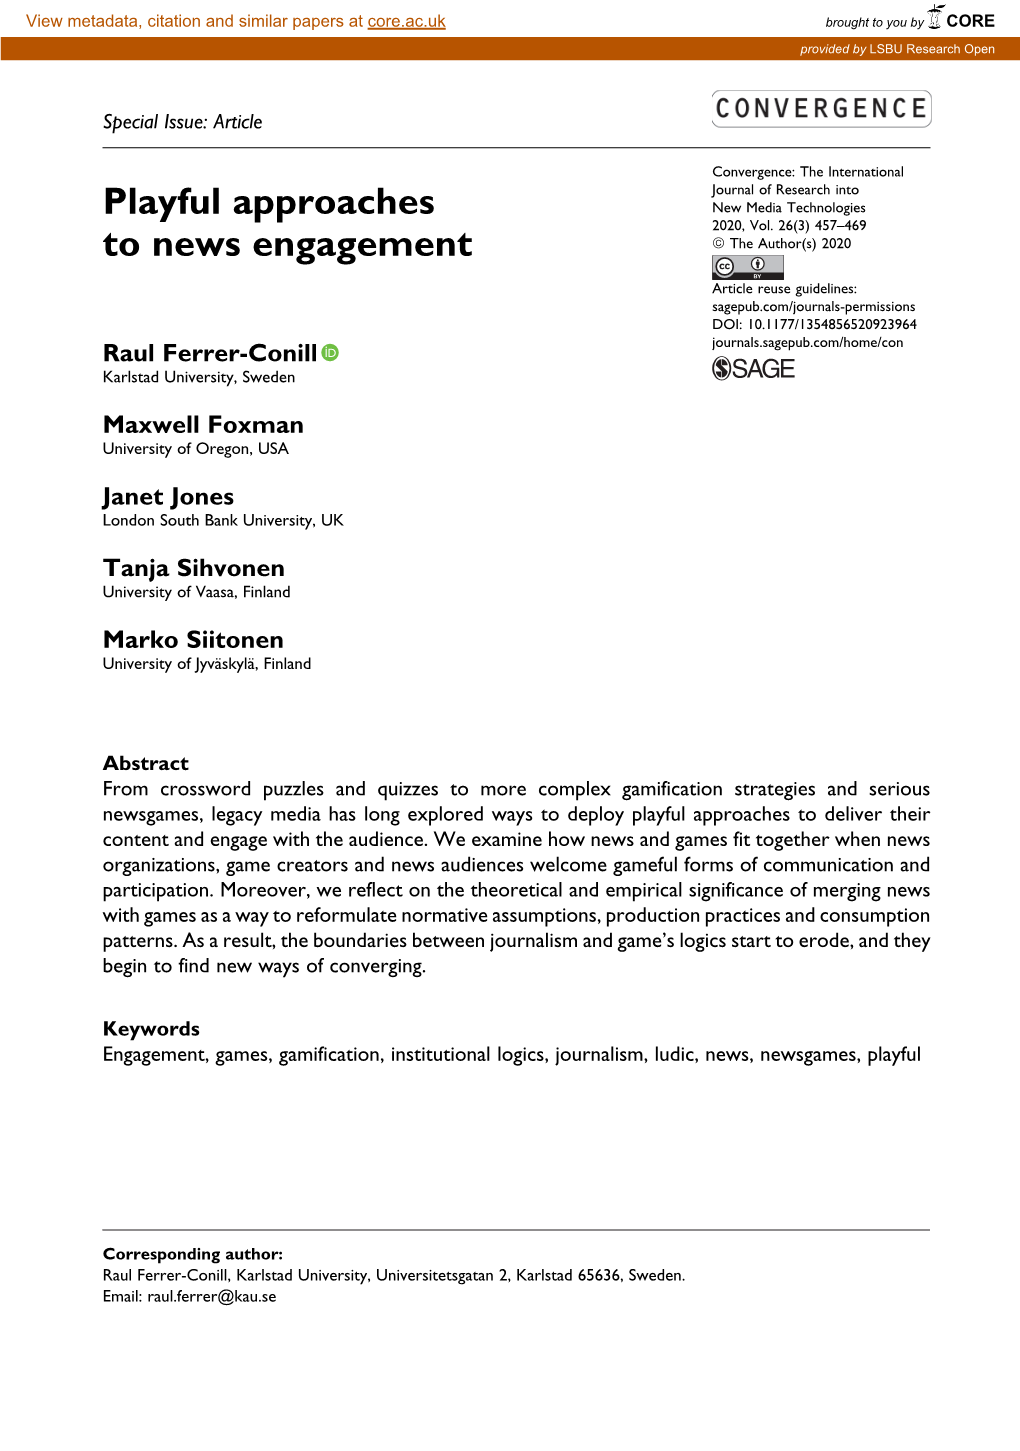 Playful Approaches to News Engagement